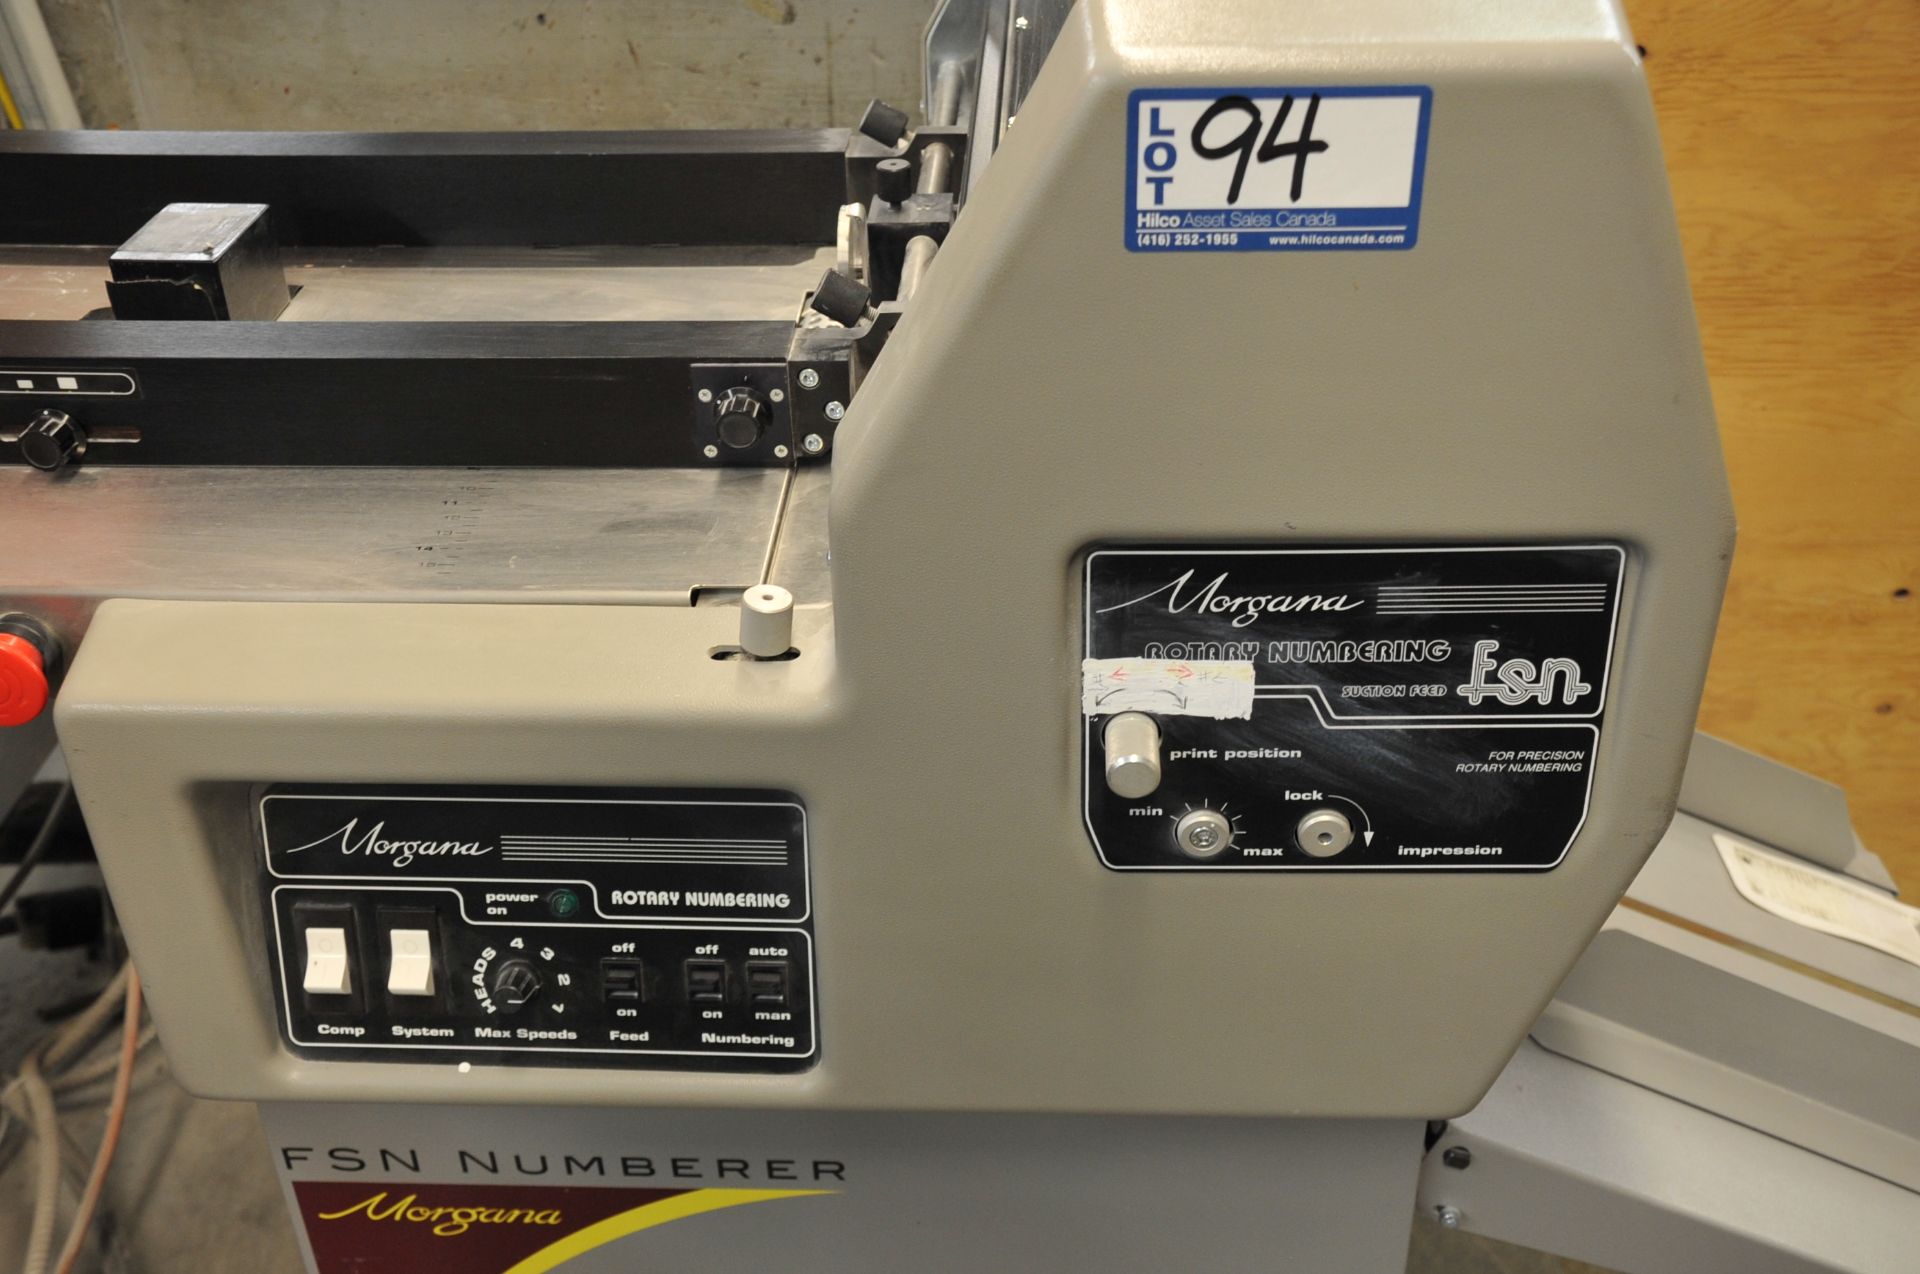 Morgana Model FSN65031 Suction Feed Rotary 230V Numbering Unit; Serial Number: 063980LGAM - Image 2 of 2